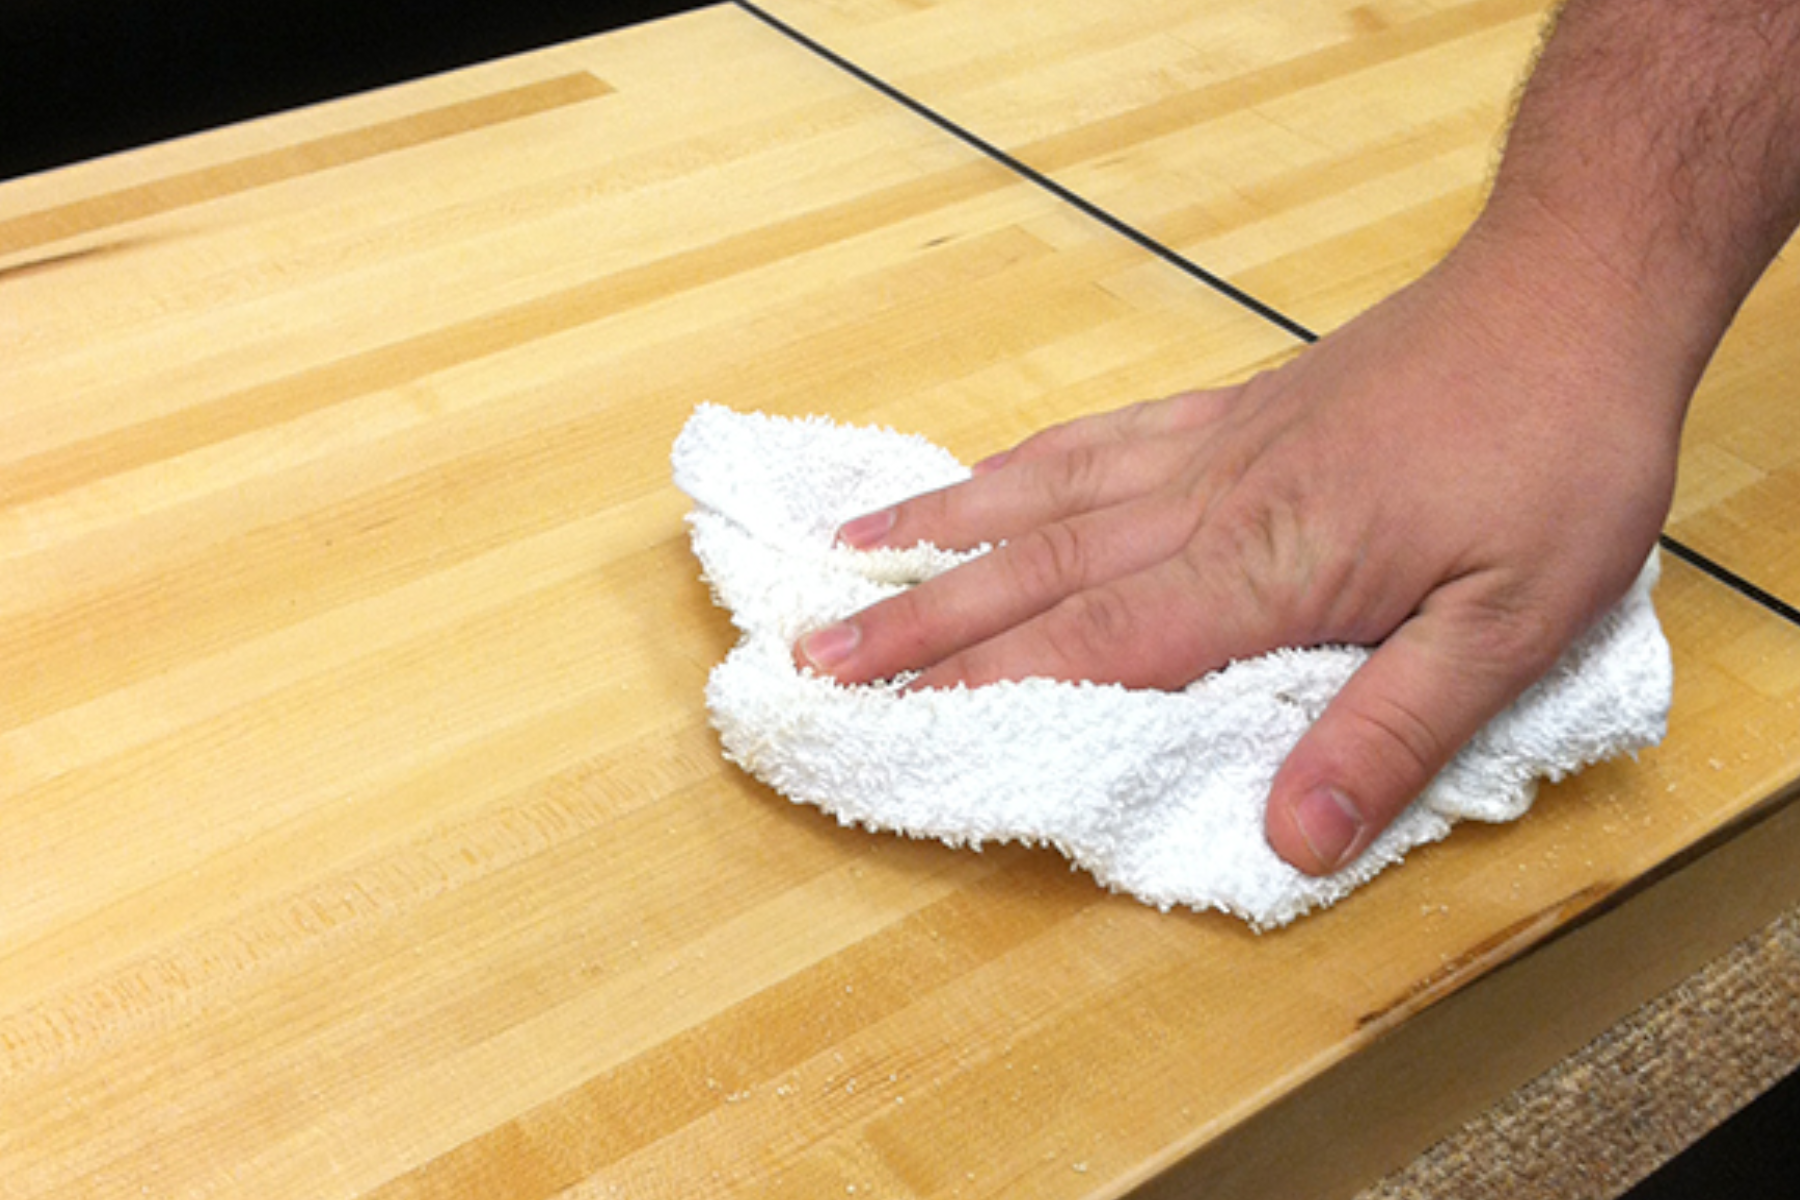 A man's hand washing the surface of a shuffleboard table with a white cloth